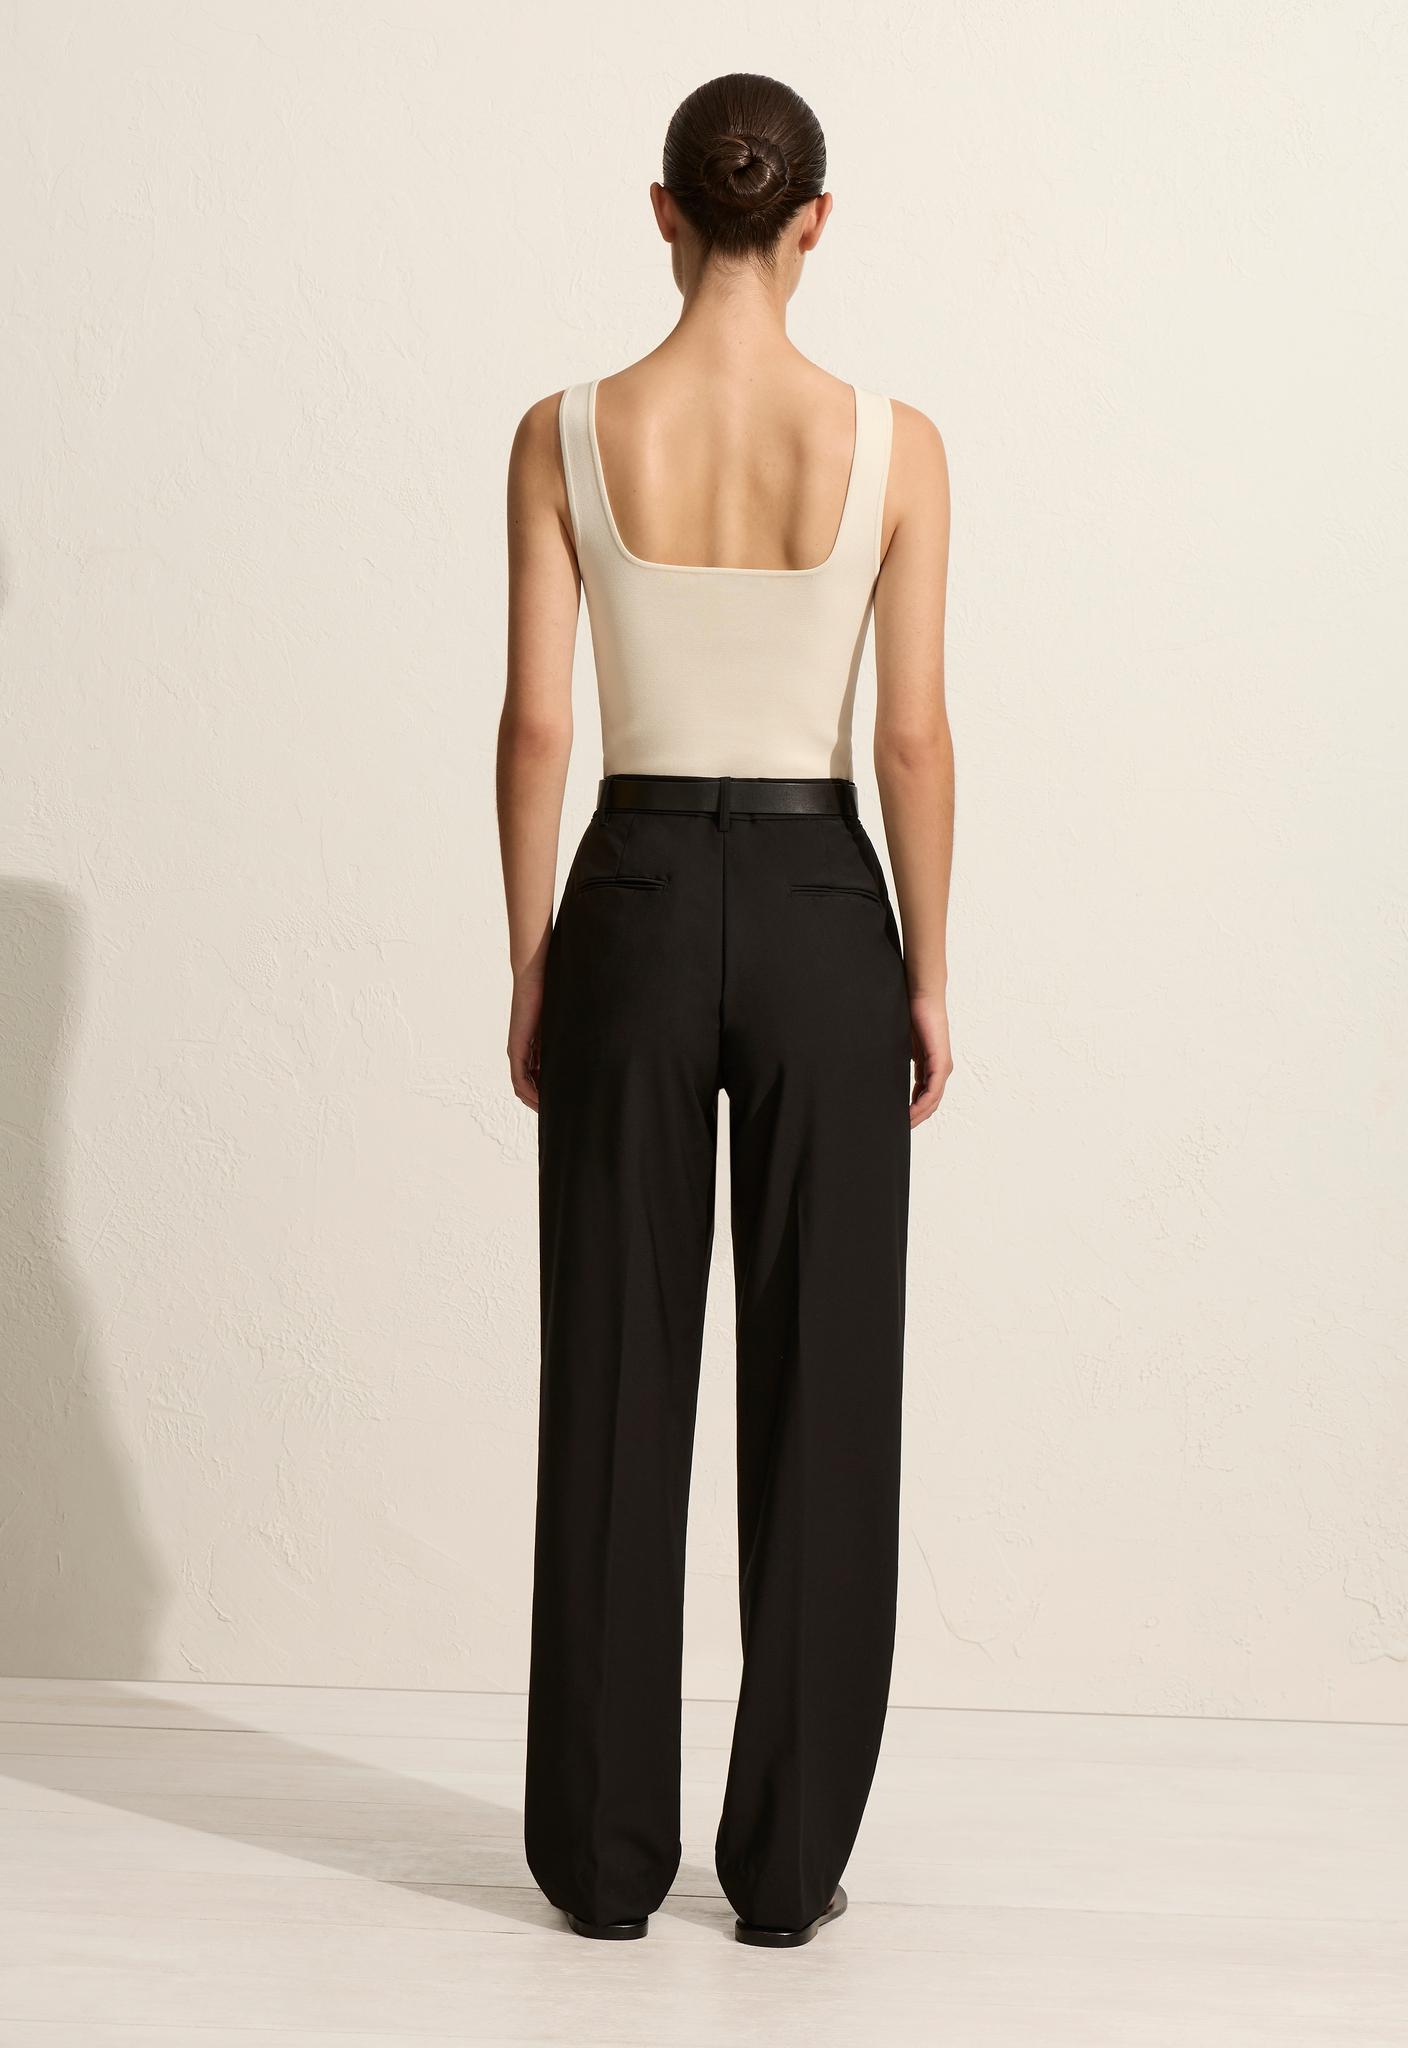 Relaxed Tailored Pleat Trouser - Black - Matteau